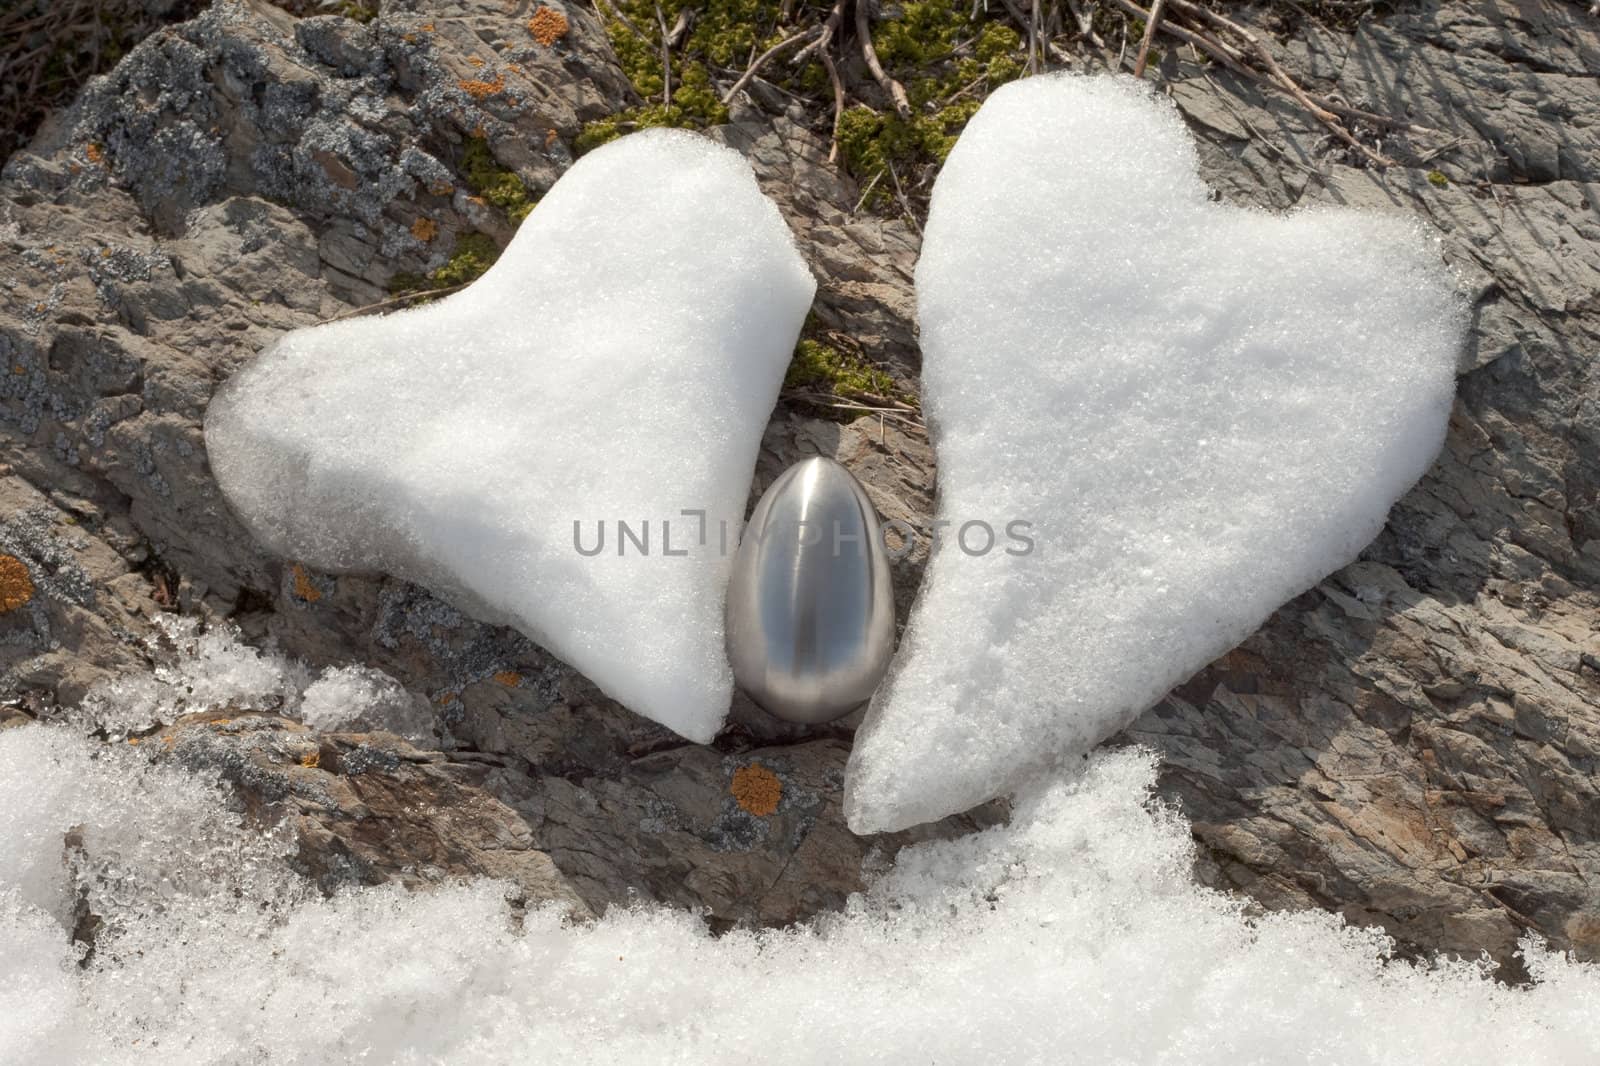 Two snow hearts and stell egg on rock by PiLens